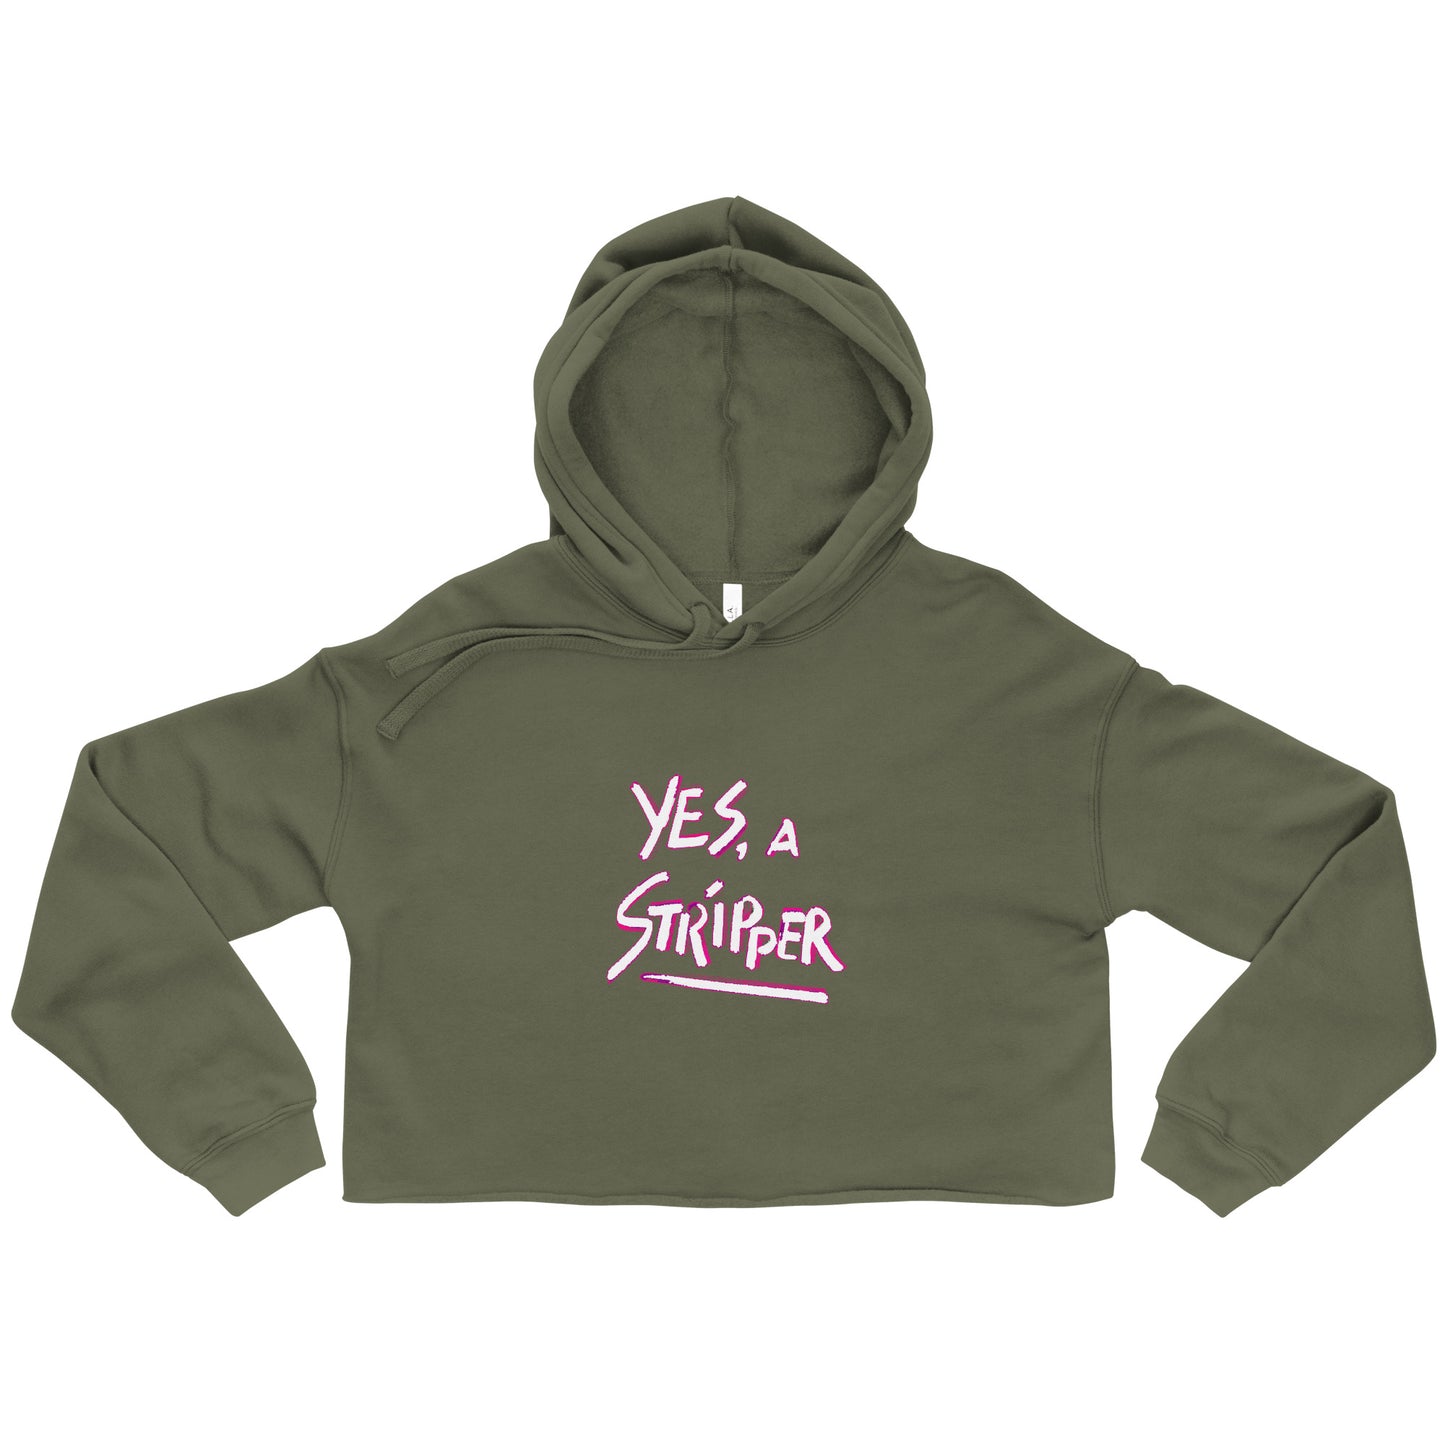 Yes, a Stripper Cropped Hoodie